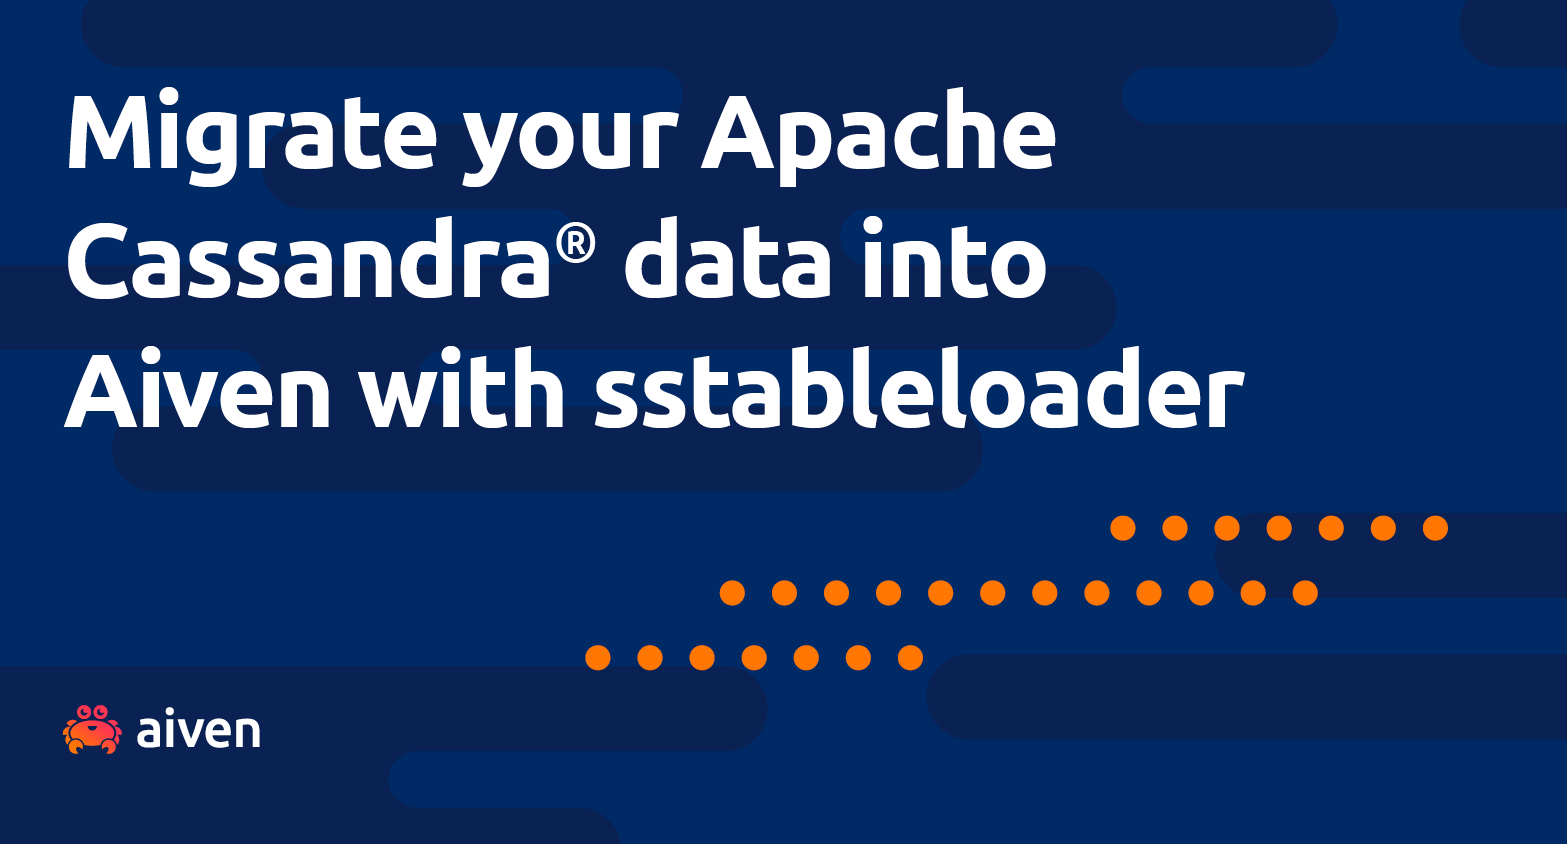 Migrate your Apache Cassandra® data into Aiven with sstableloader illustration